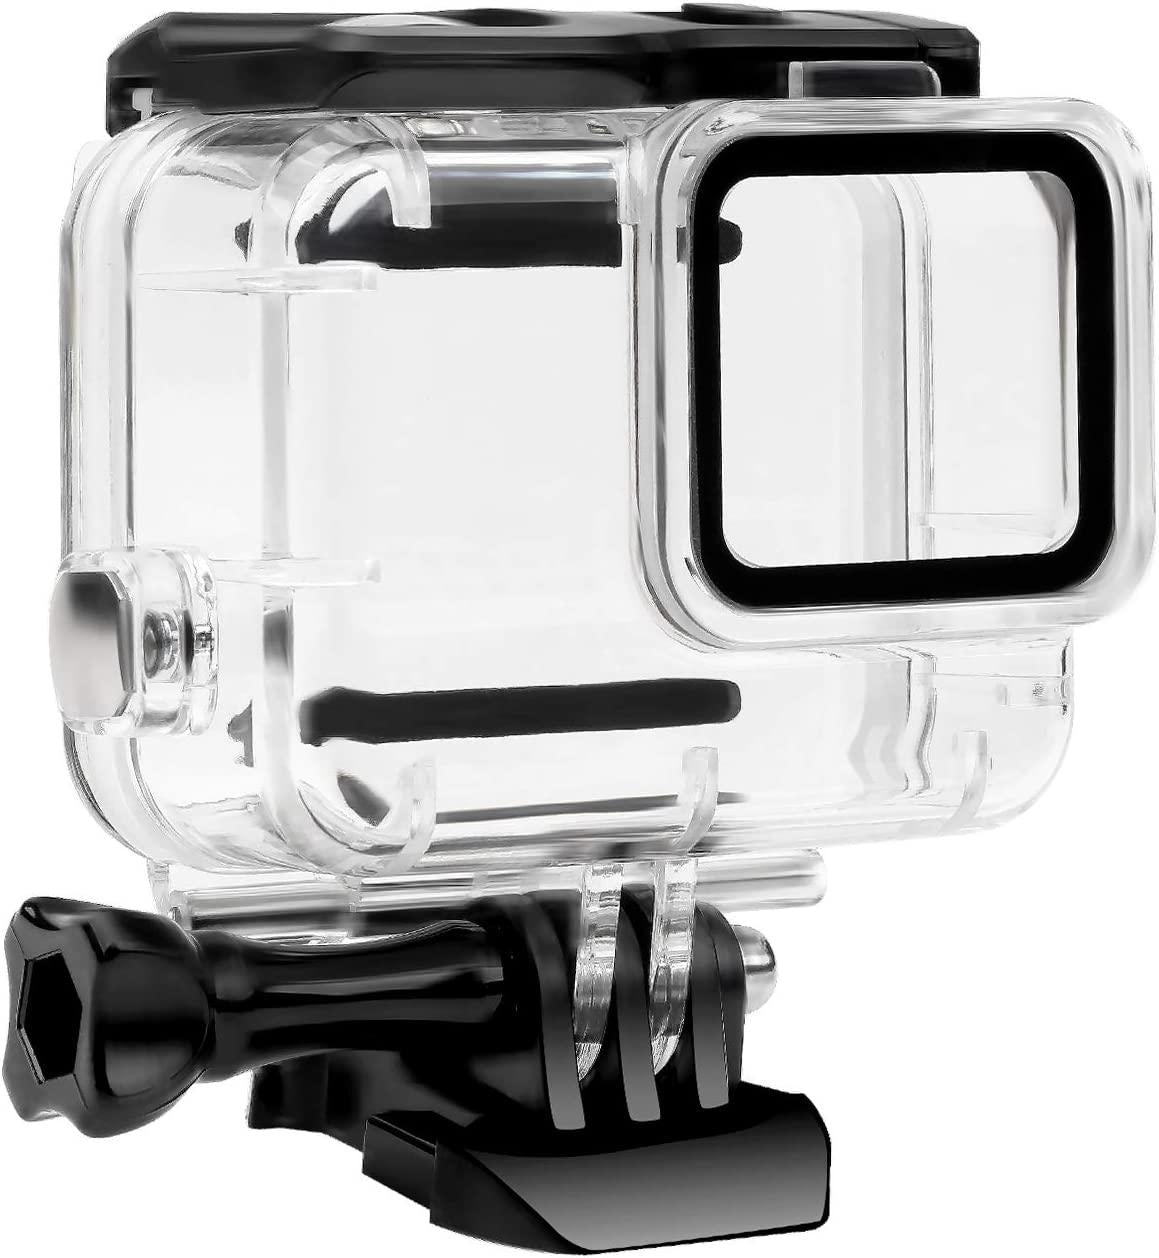 FiTSTILL, FitStill Waterproof Housing Case for GoPro Hero 7 White and Silver, Protective 45m Underwater Dive Case Shell with Bracket Accessories for Go Pro Hero7 Action Camera